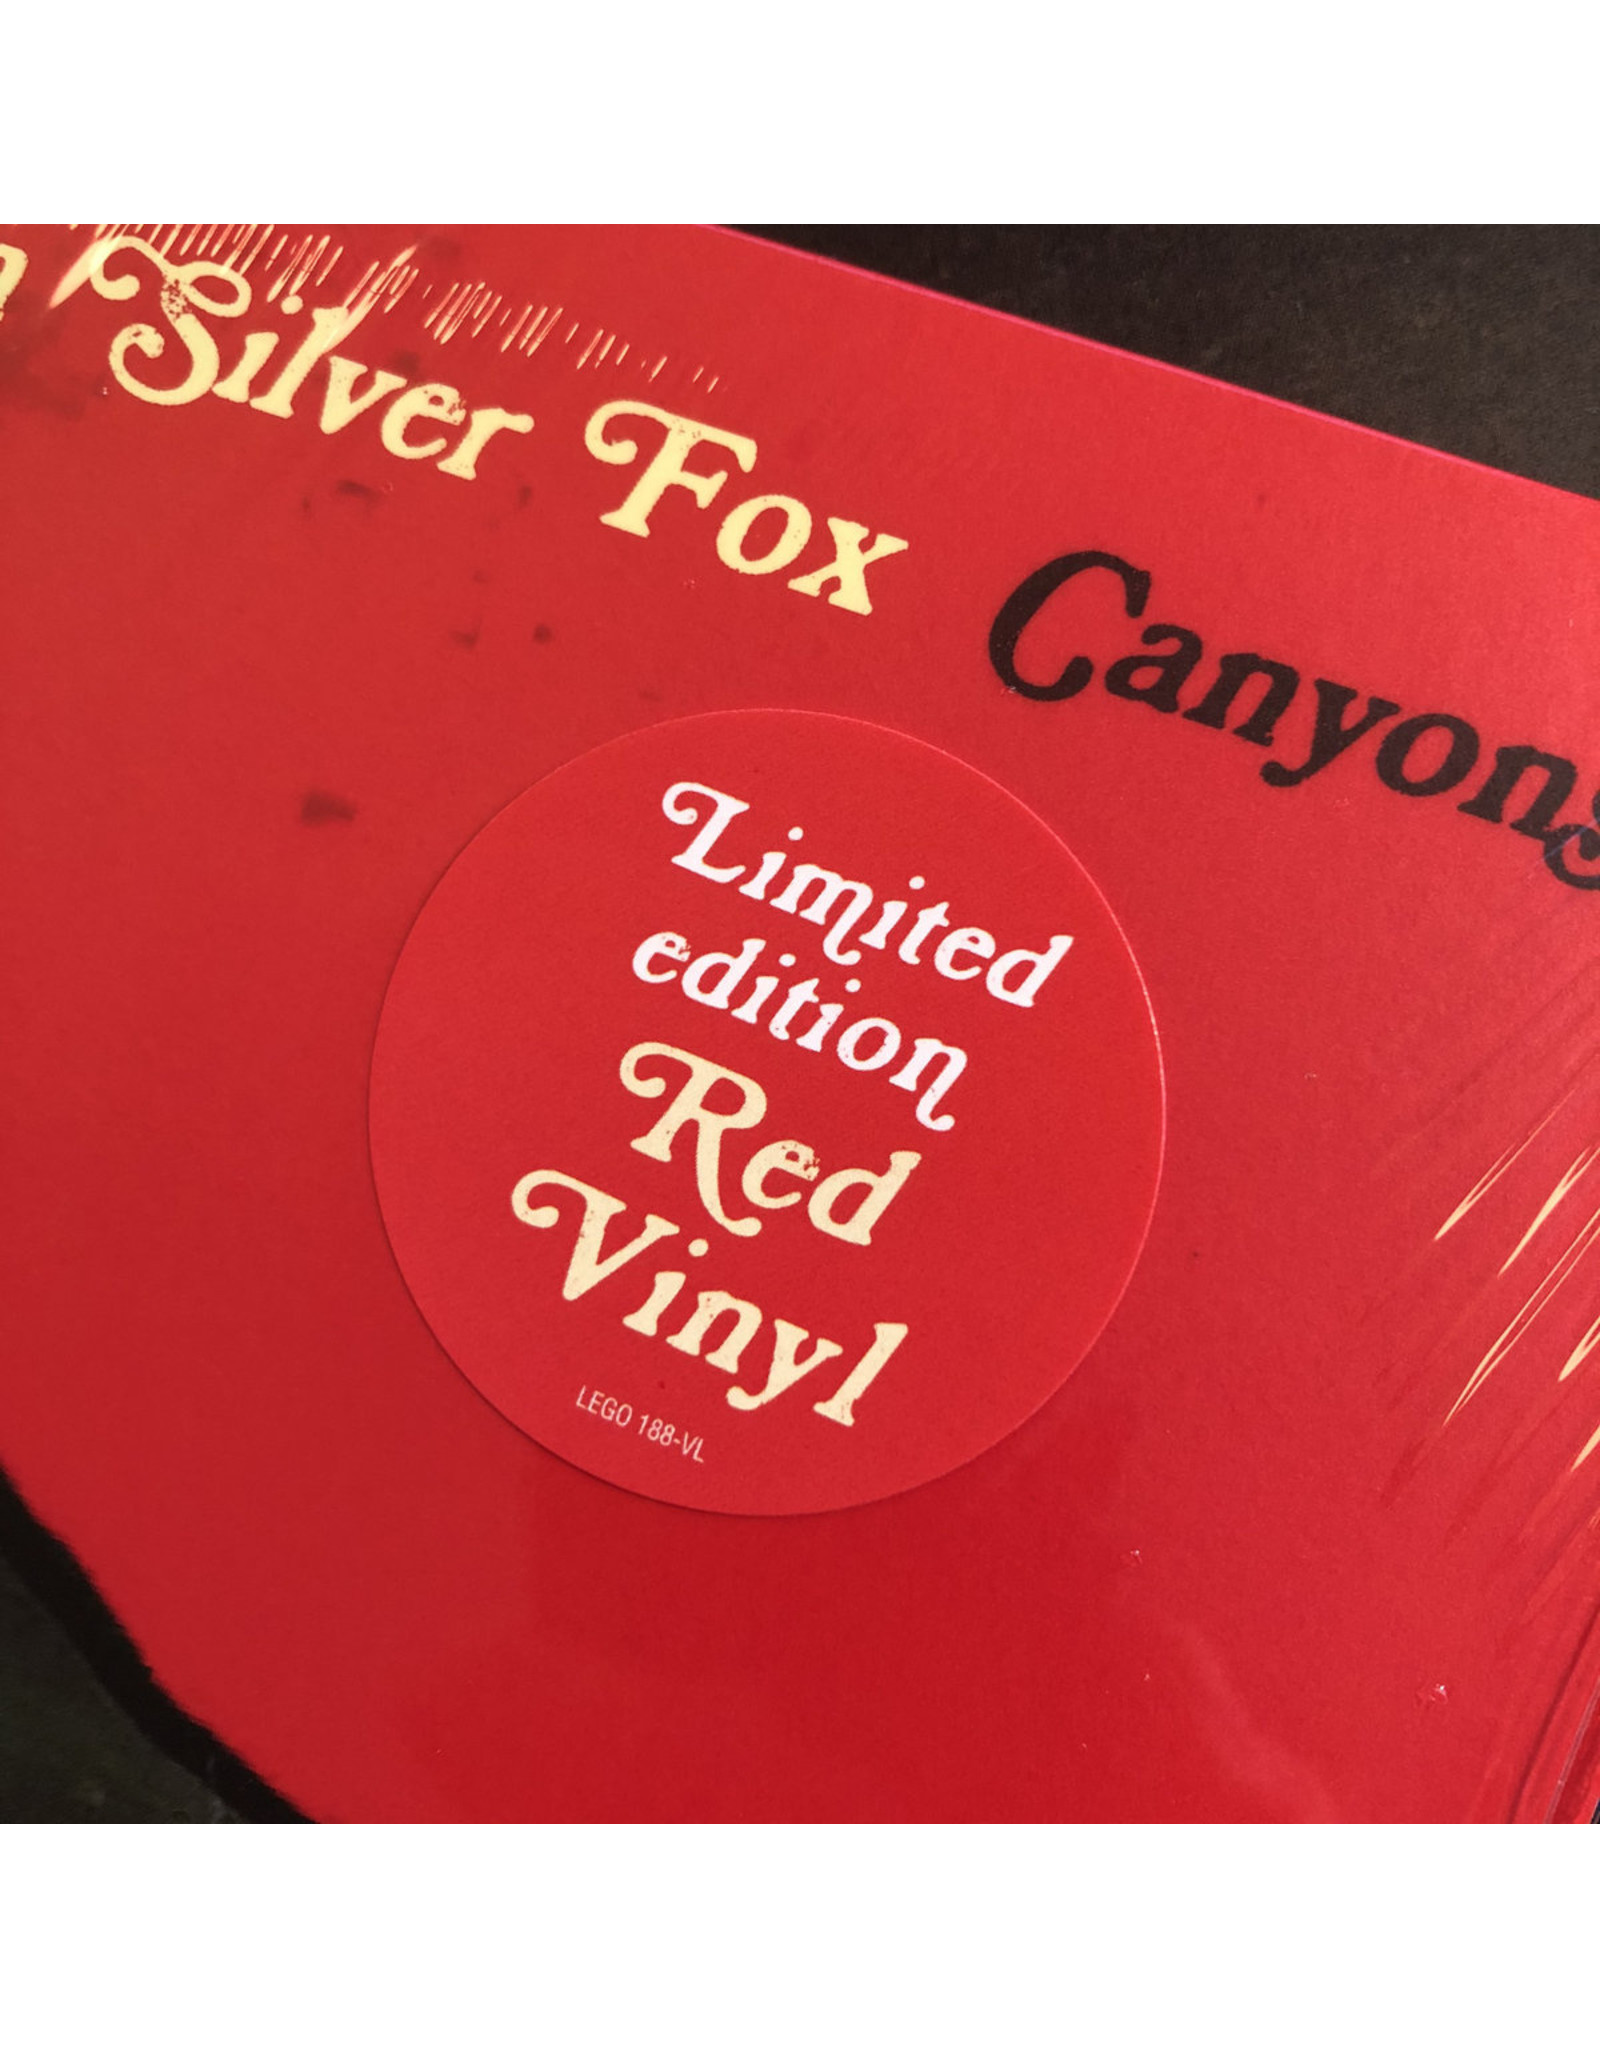 Young Gun Silver Fox - Canyons (Exclusive Red Vinyl)